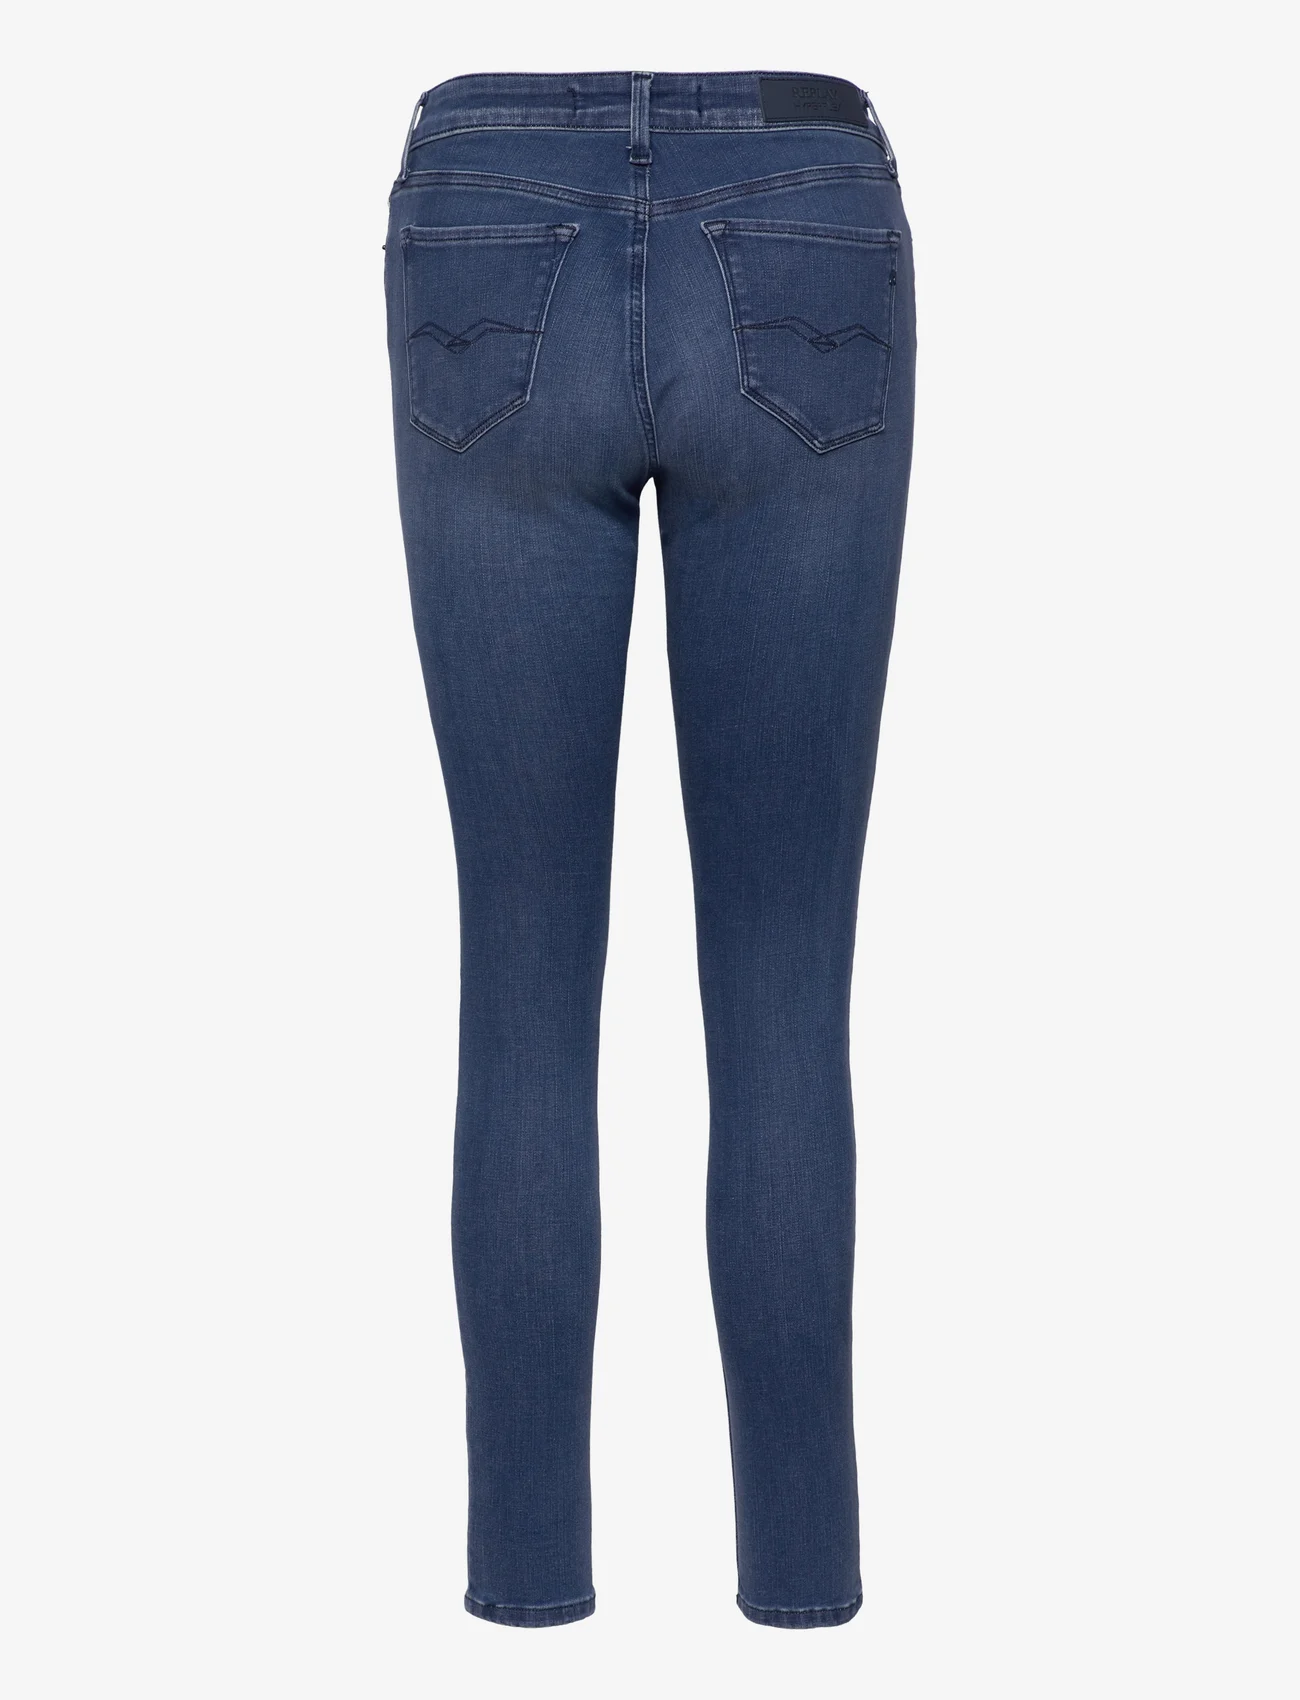 Replay - LUZIEN Trousers Hyperflex Forever Blue - skinny jeans - blue - 1